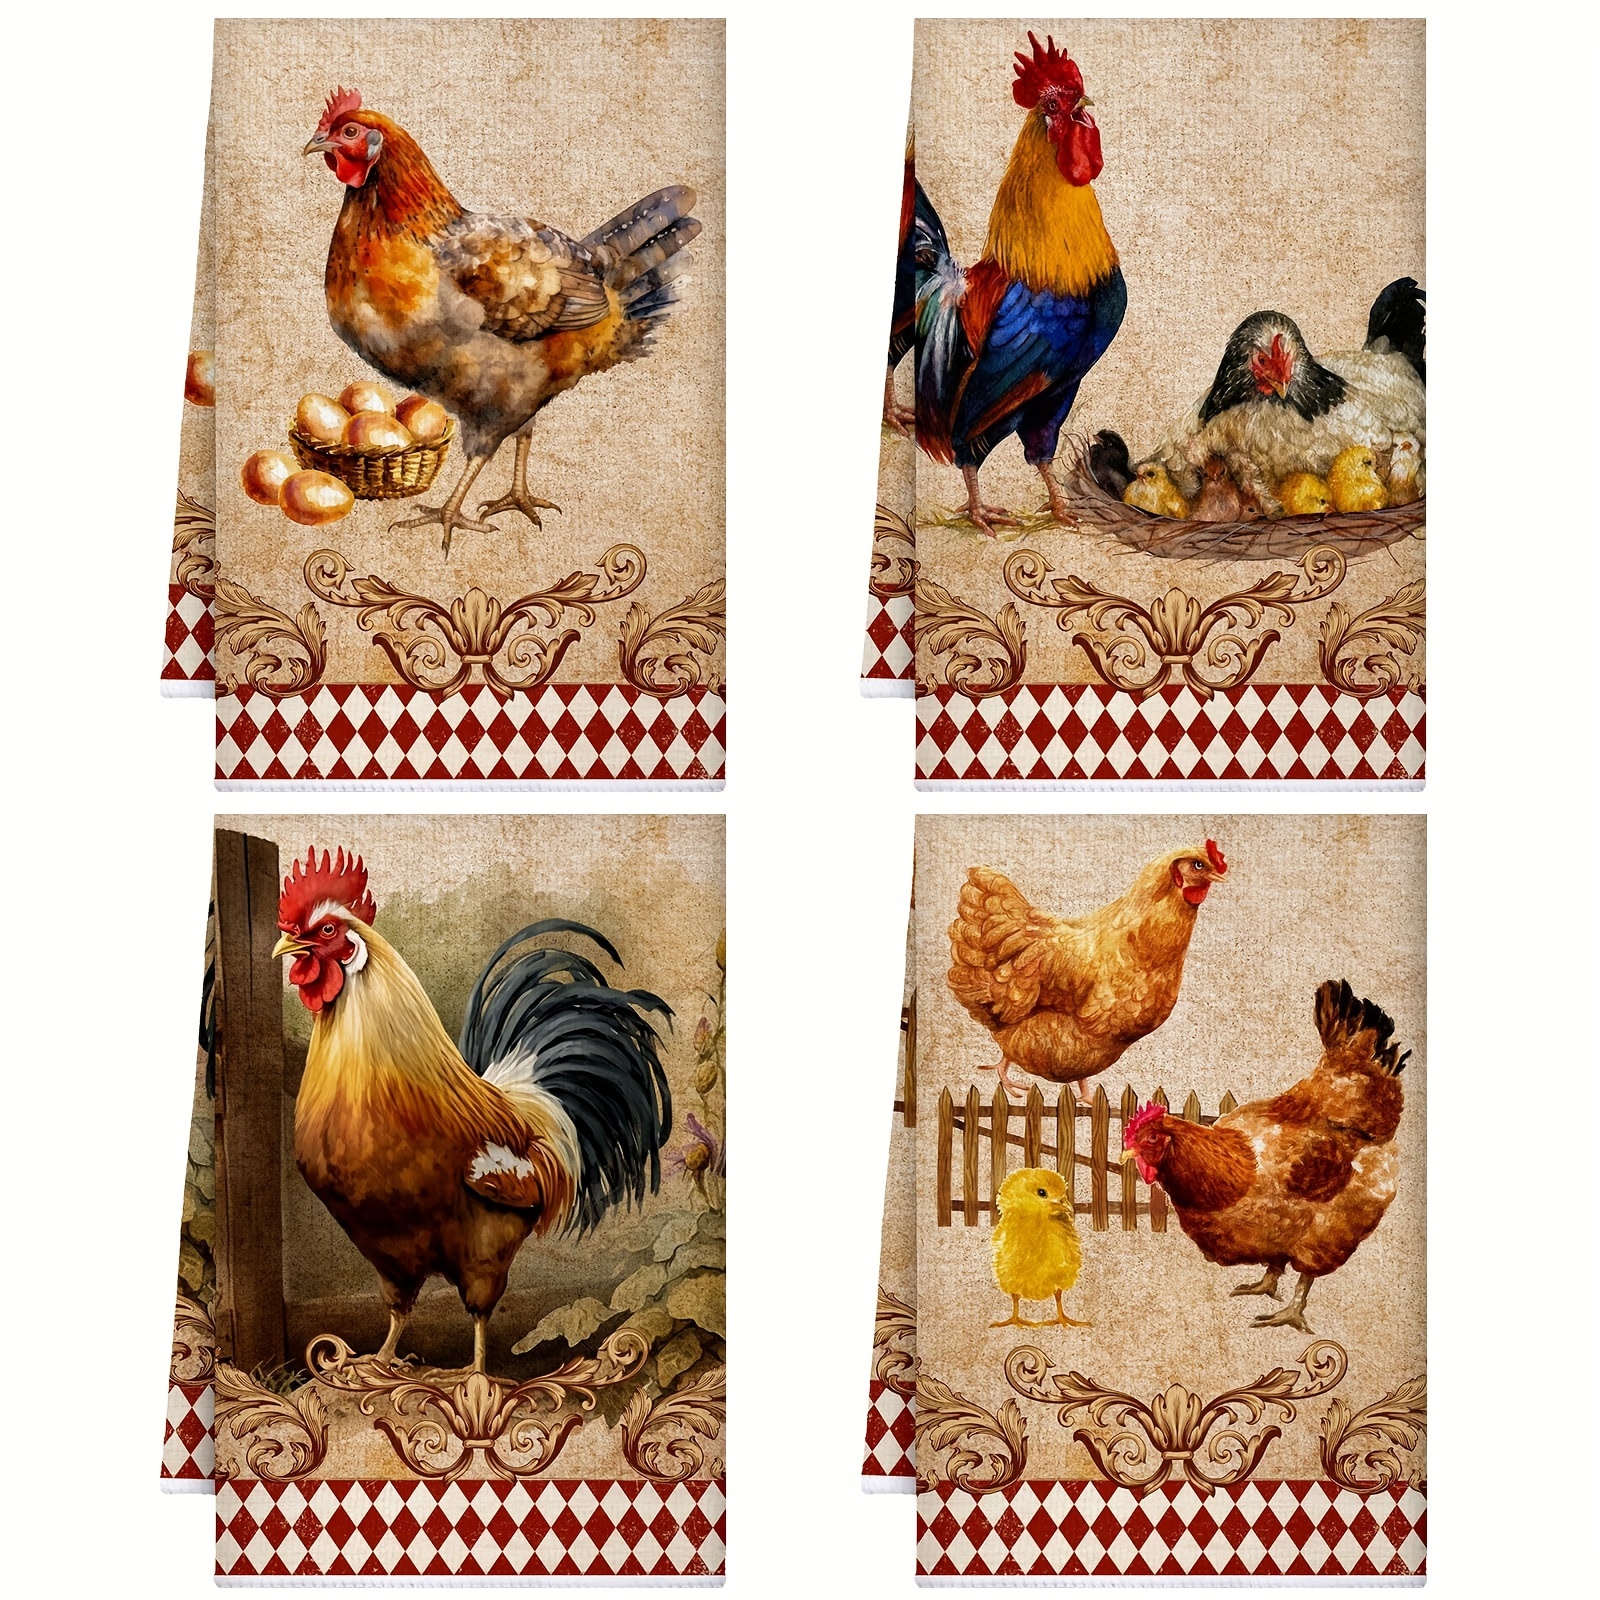 

4pcs, Hand Towels, Farmhouse Rustic Rooster Kitchen Towels, Polyester Dish Cloths, Country Style Hand Towels, Vintage Christmas Bathroom Tea Towels In Classic Colors